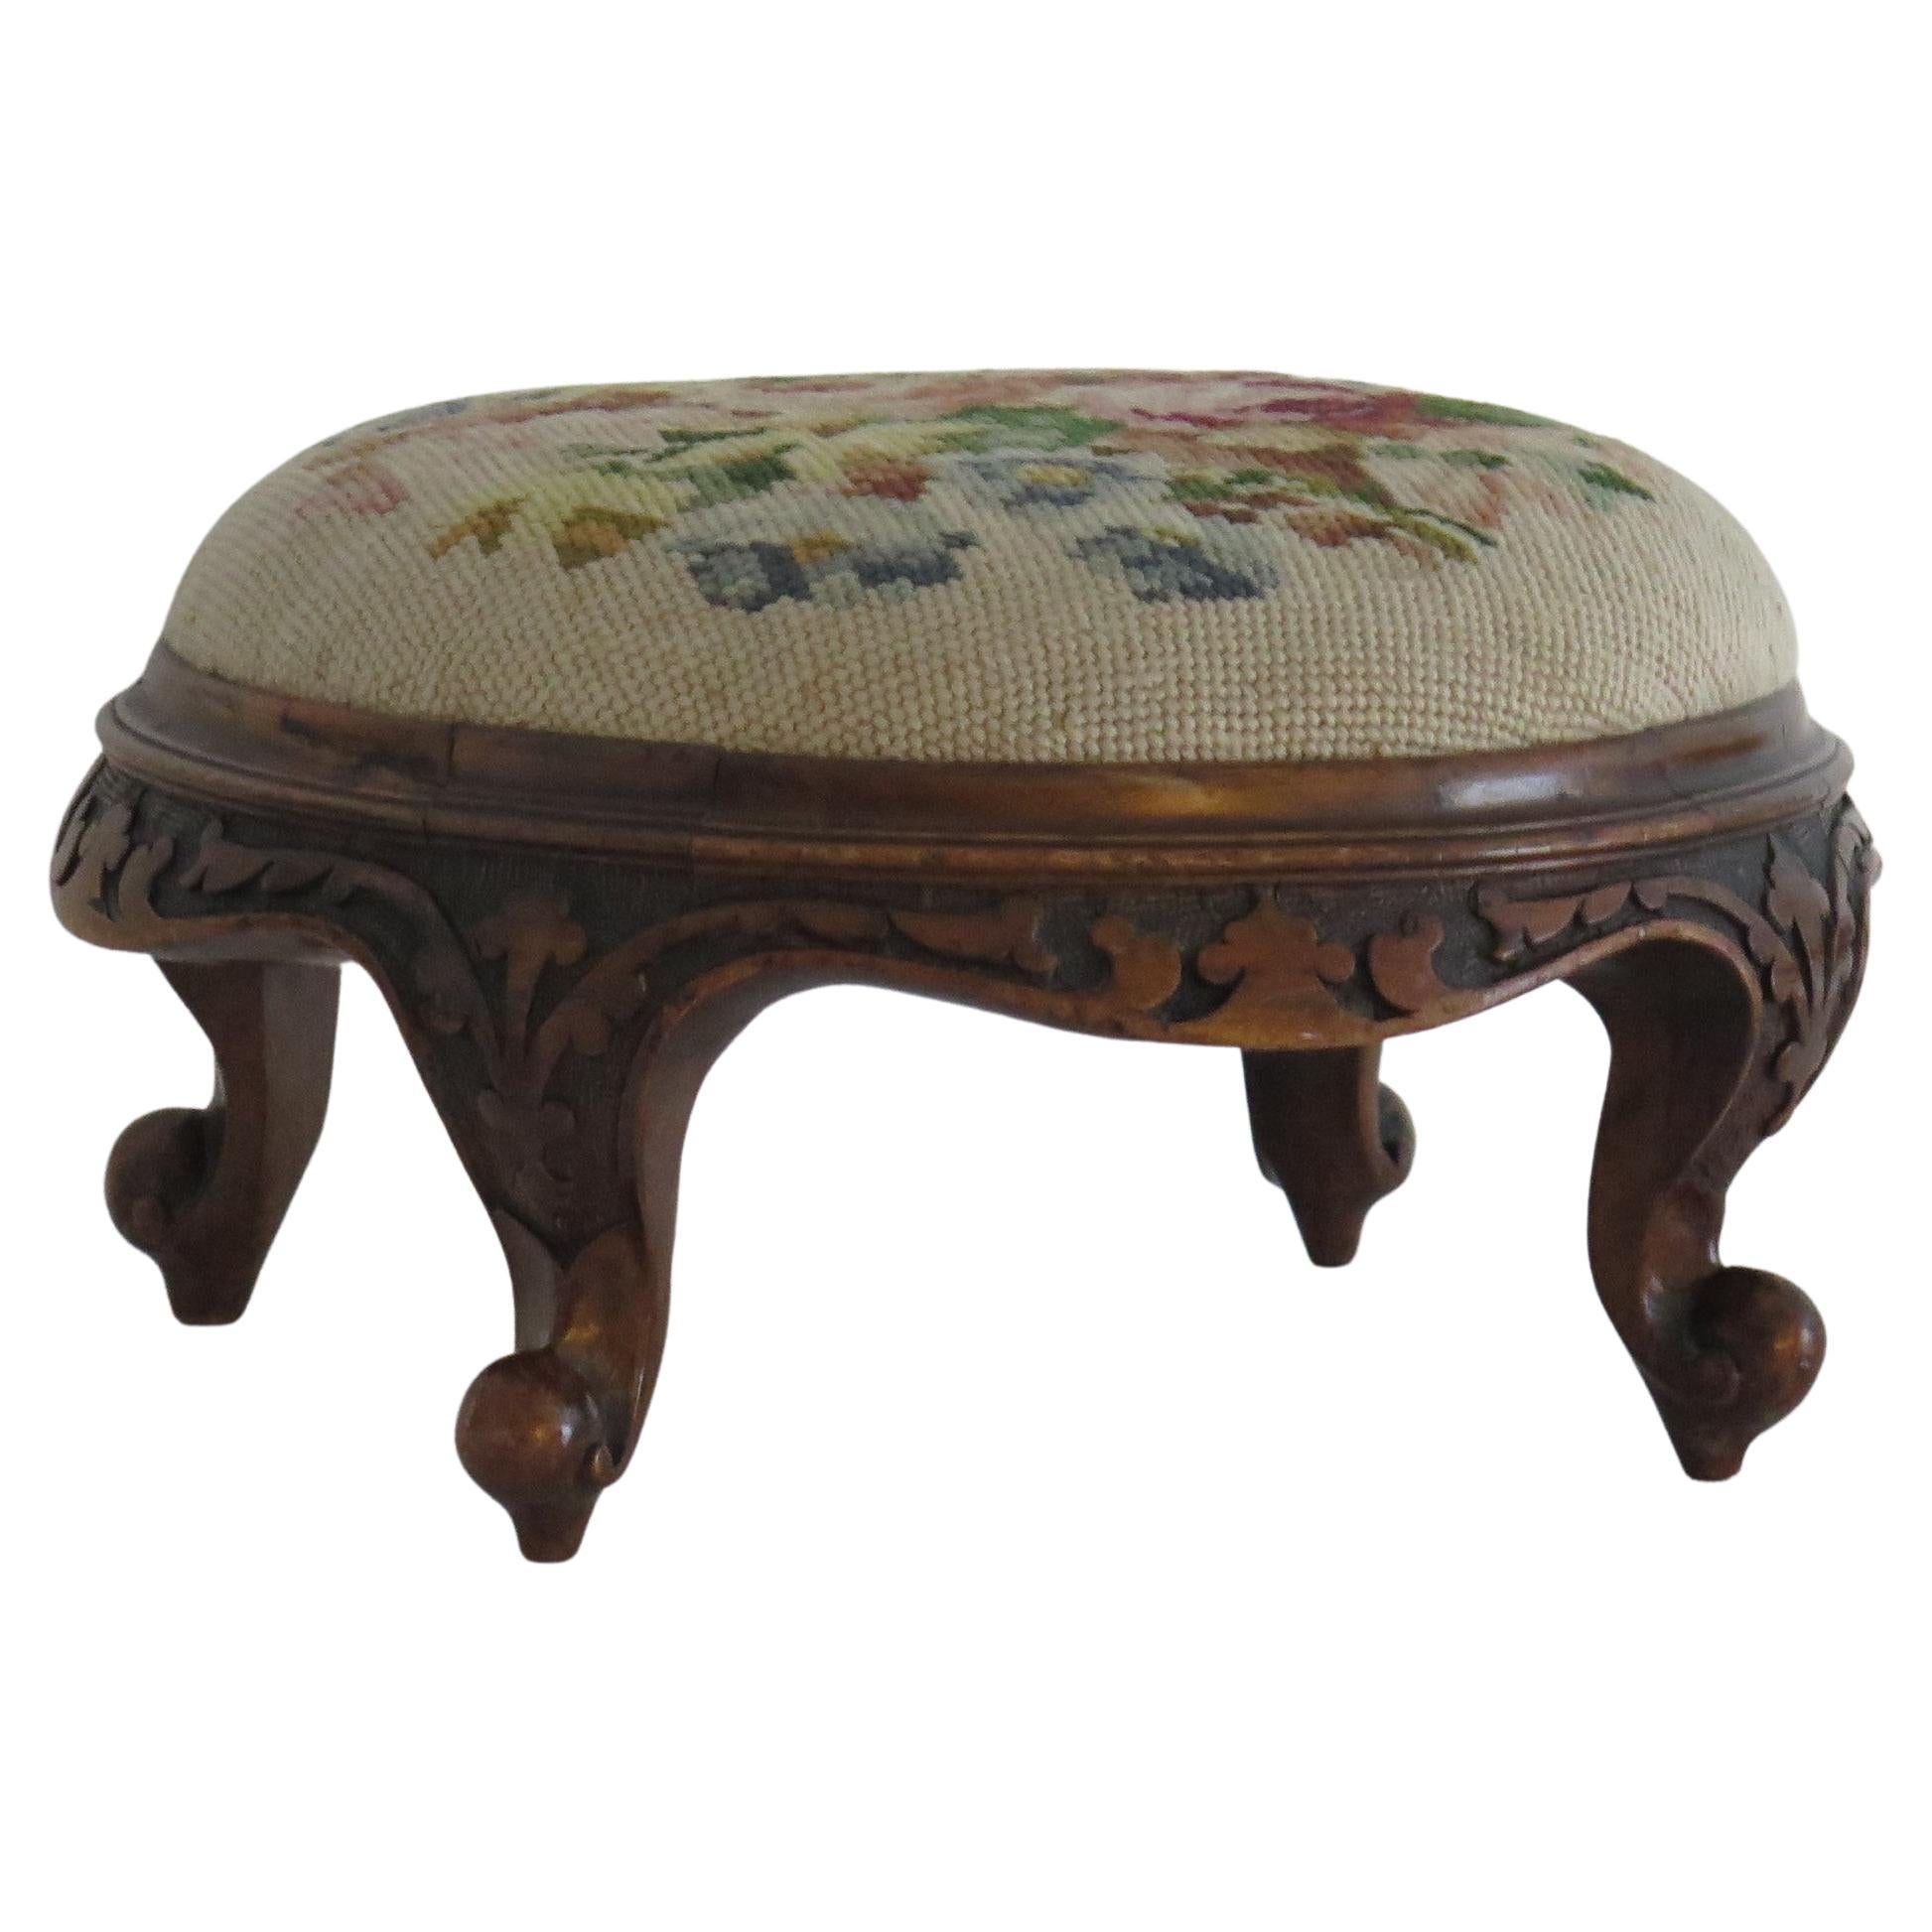 Foot Stool Early Victorian Carved Walnut with Wool-Work Top, English, Circa 1850 For Sale